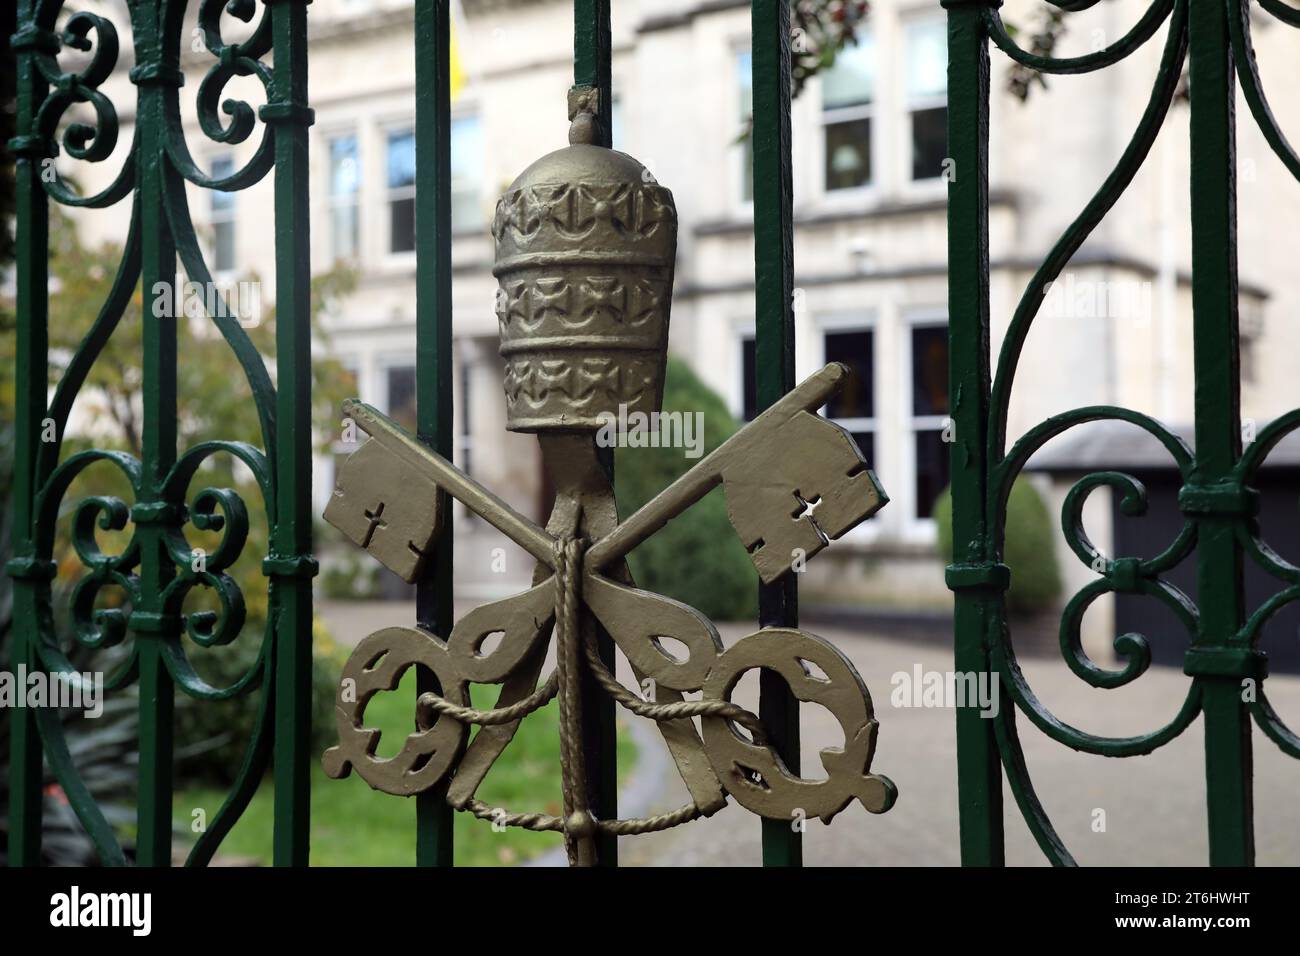 The Vatican’s coat of arms, on the gate of the Vatican’s embassy in the UK – officially the Apostolic Nunciature to Great Britain, in Wimbledon, Londo Stock Photo